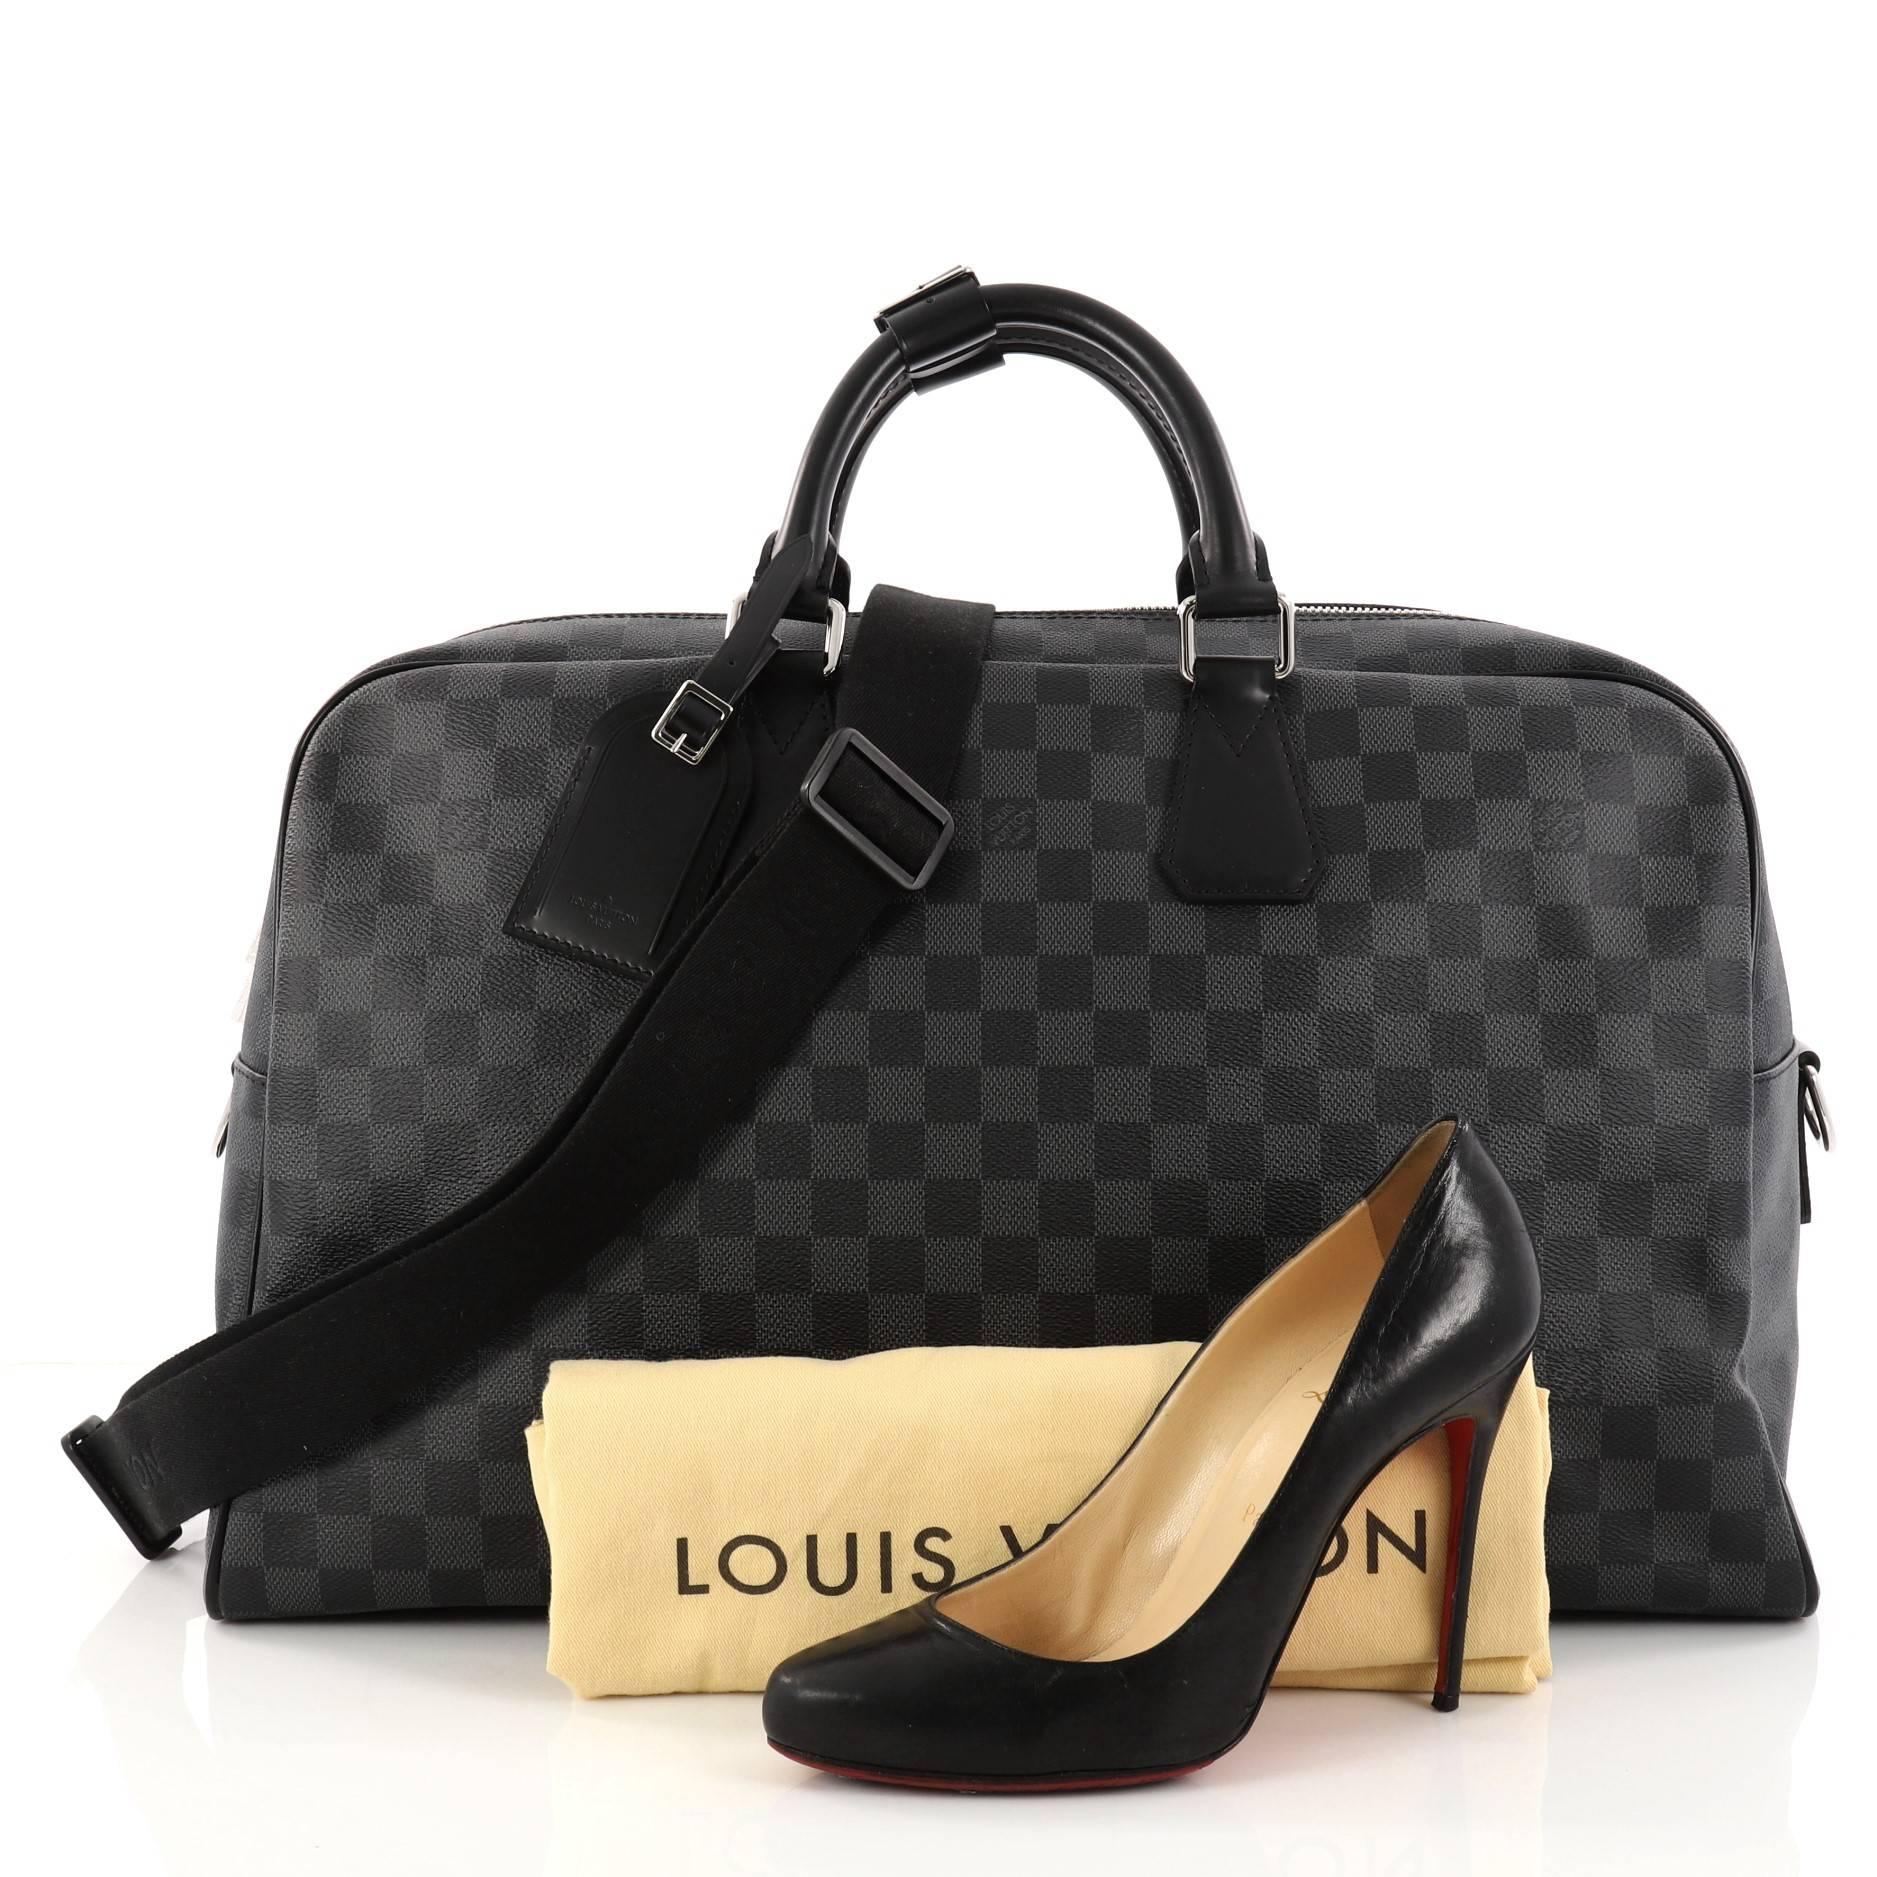 This authentic Louis Vuitton Neo Kendall Handbag Damier Graphite is a practical cabin-sized duffle with a contemporary and elegant design made for light travels. Crafted from luxurious black damier graphite coated canvas, this bag features